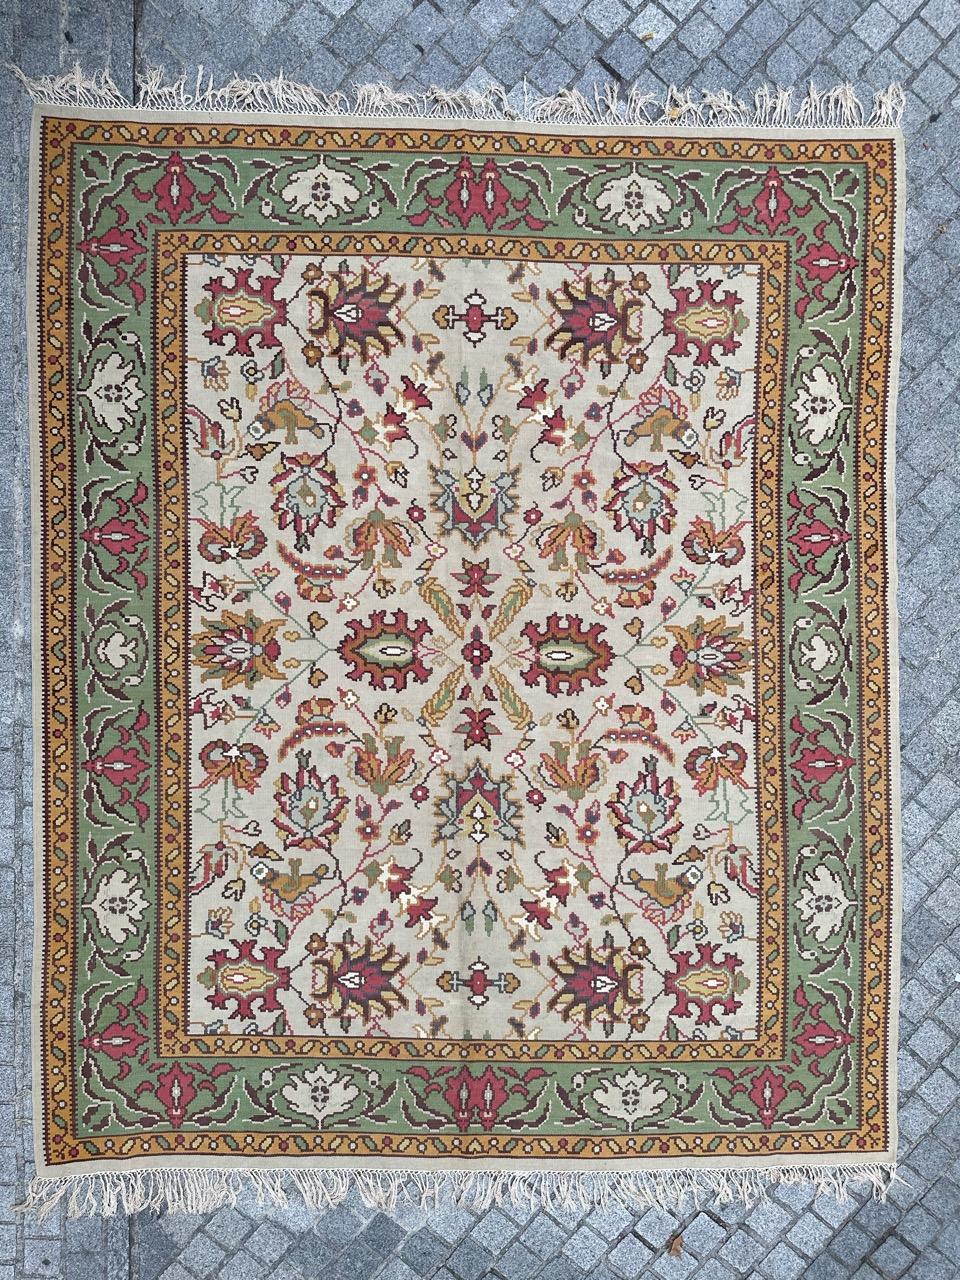 Beautiful vintage Kilim with a stunning antique Oushak rug-inspired design, featuring light colors. This exquisite piece is entirely handwoven with wool velvet on a cotton foundation. Set against a soft beige backdrop, it showcases repetitive